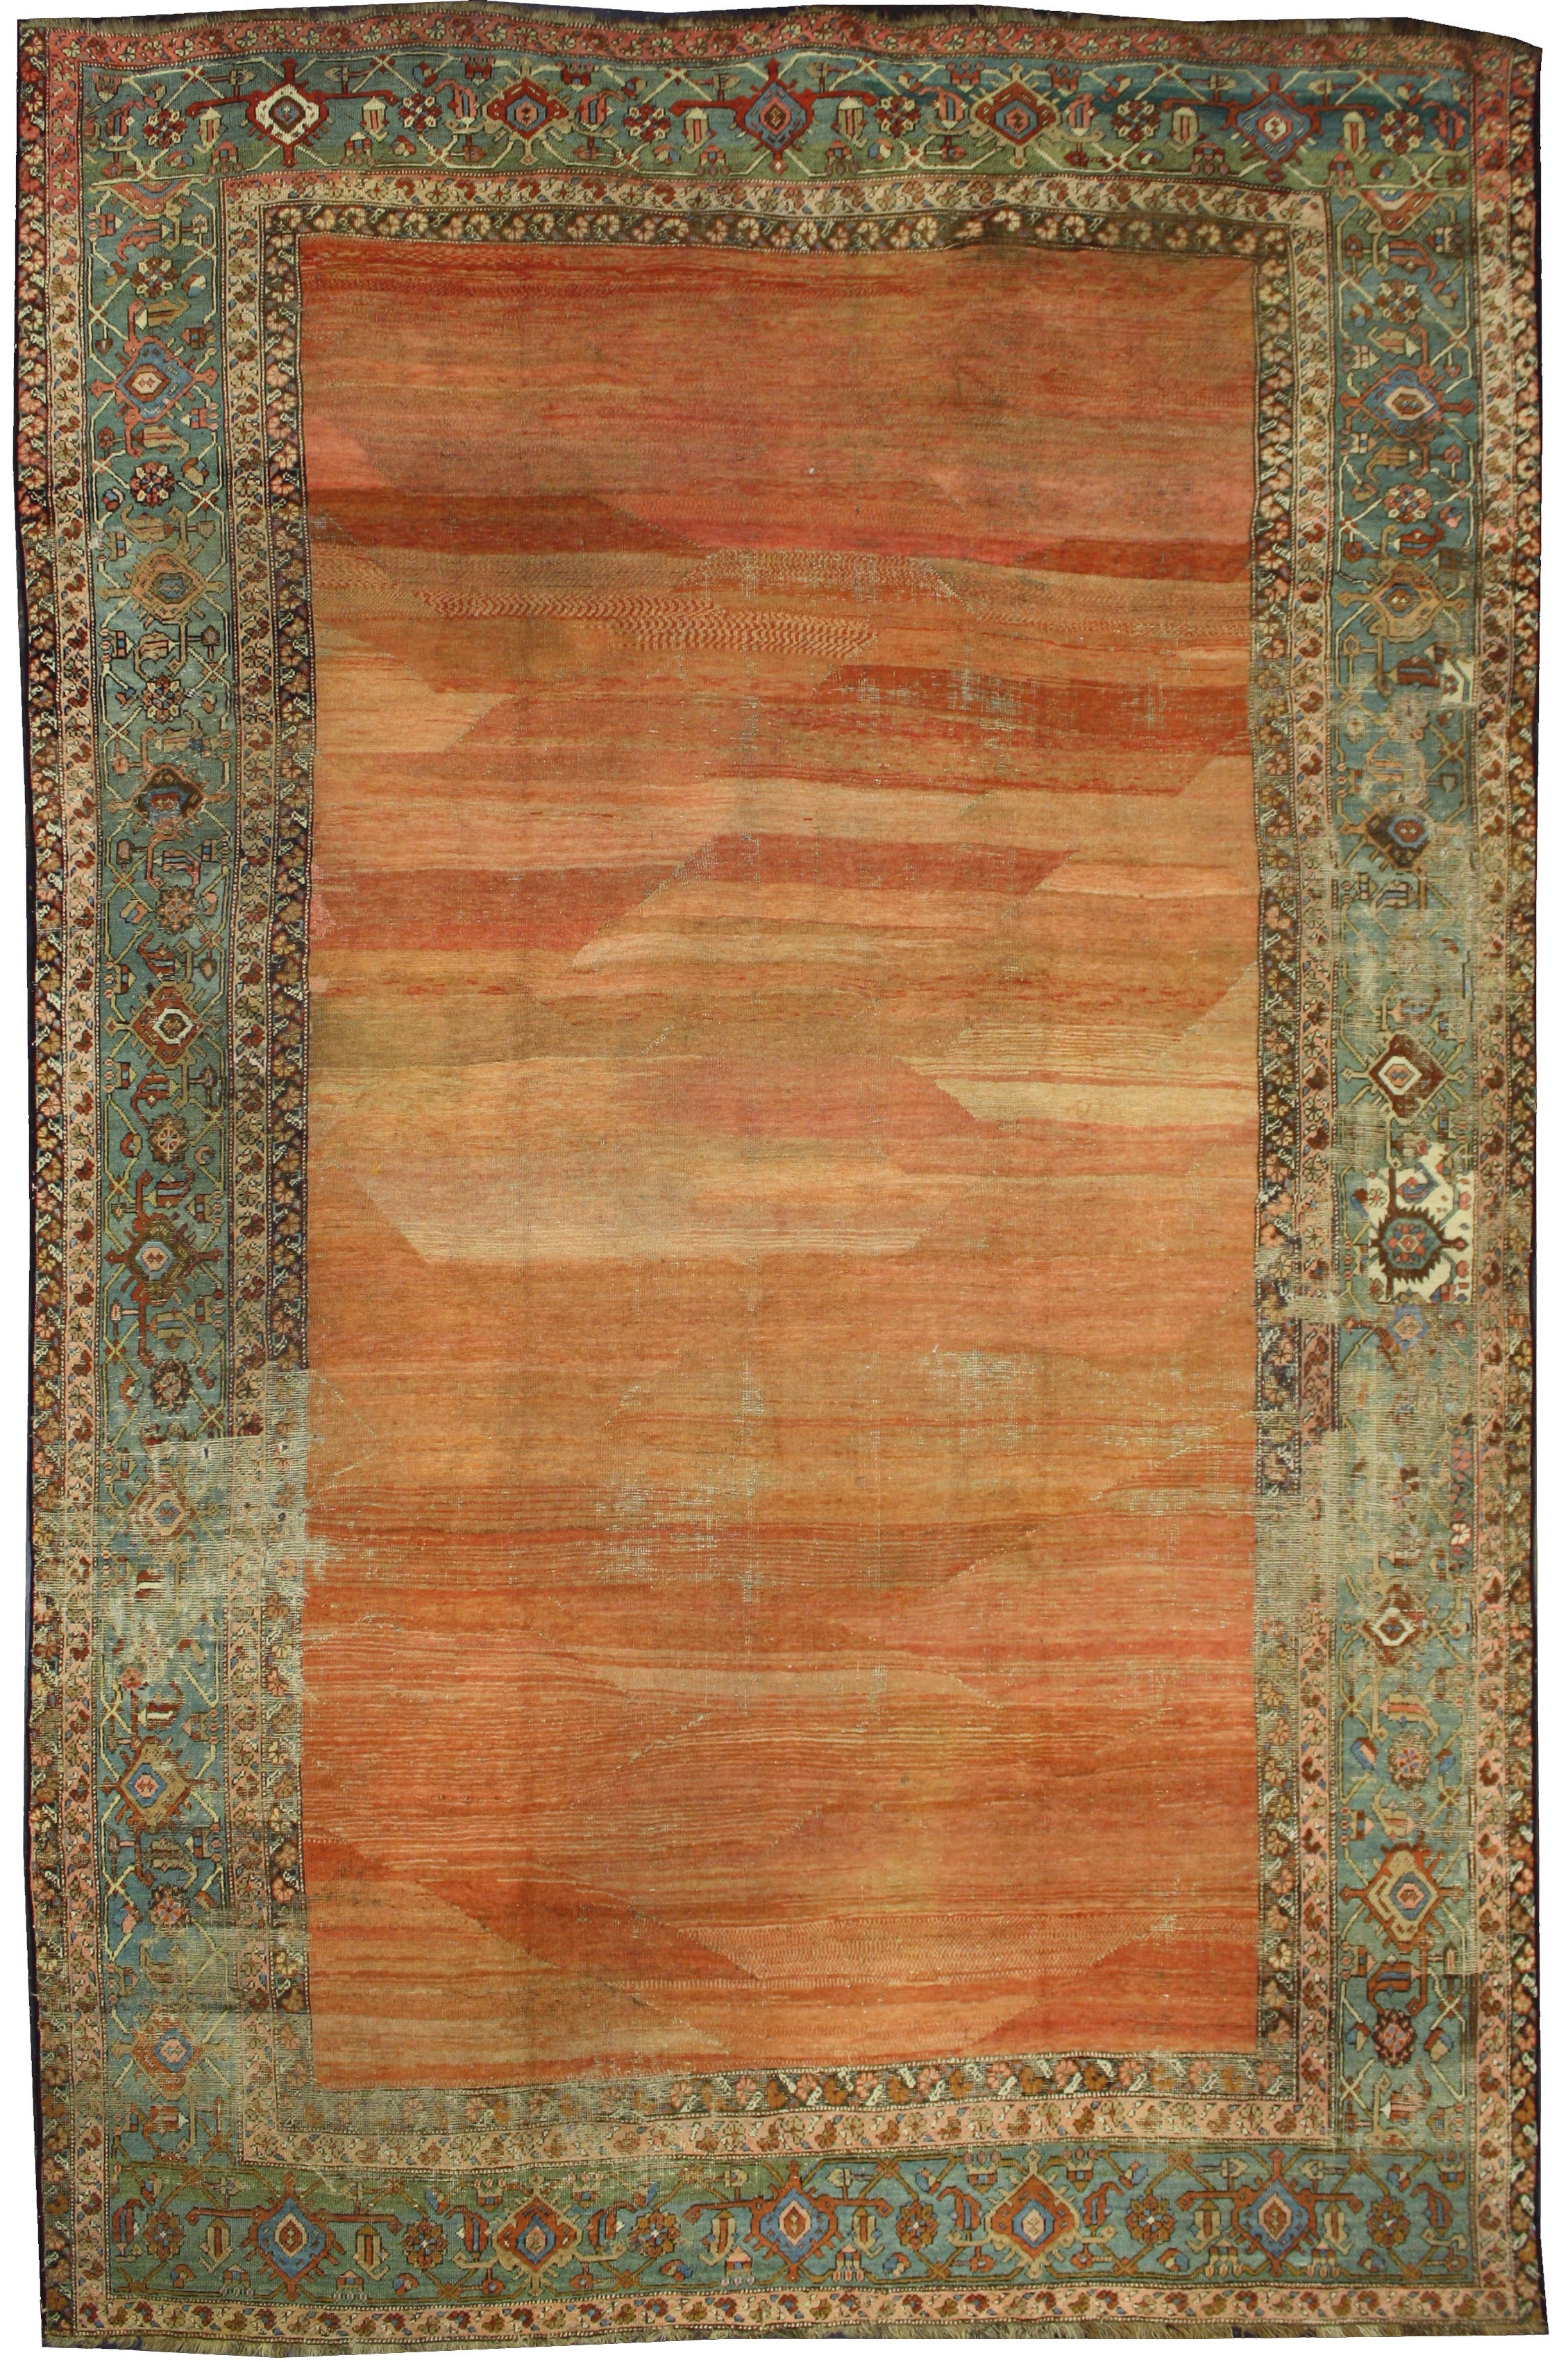 Mid-19th Century Antique Persian Bakshaish Rug with Rustic Mediterranean Style For Sale